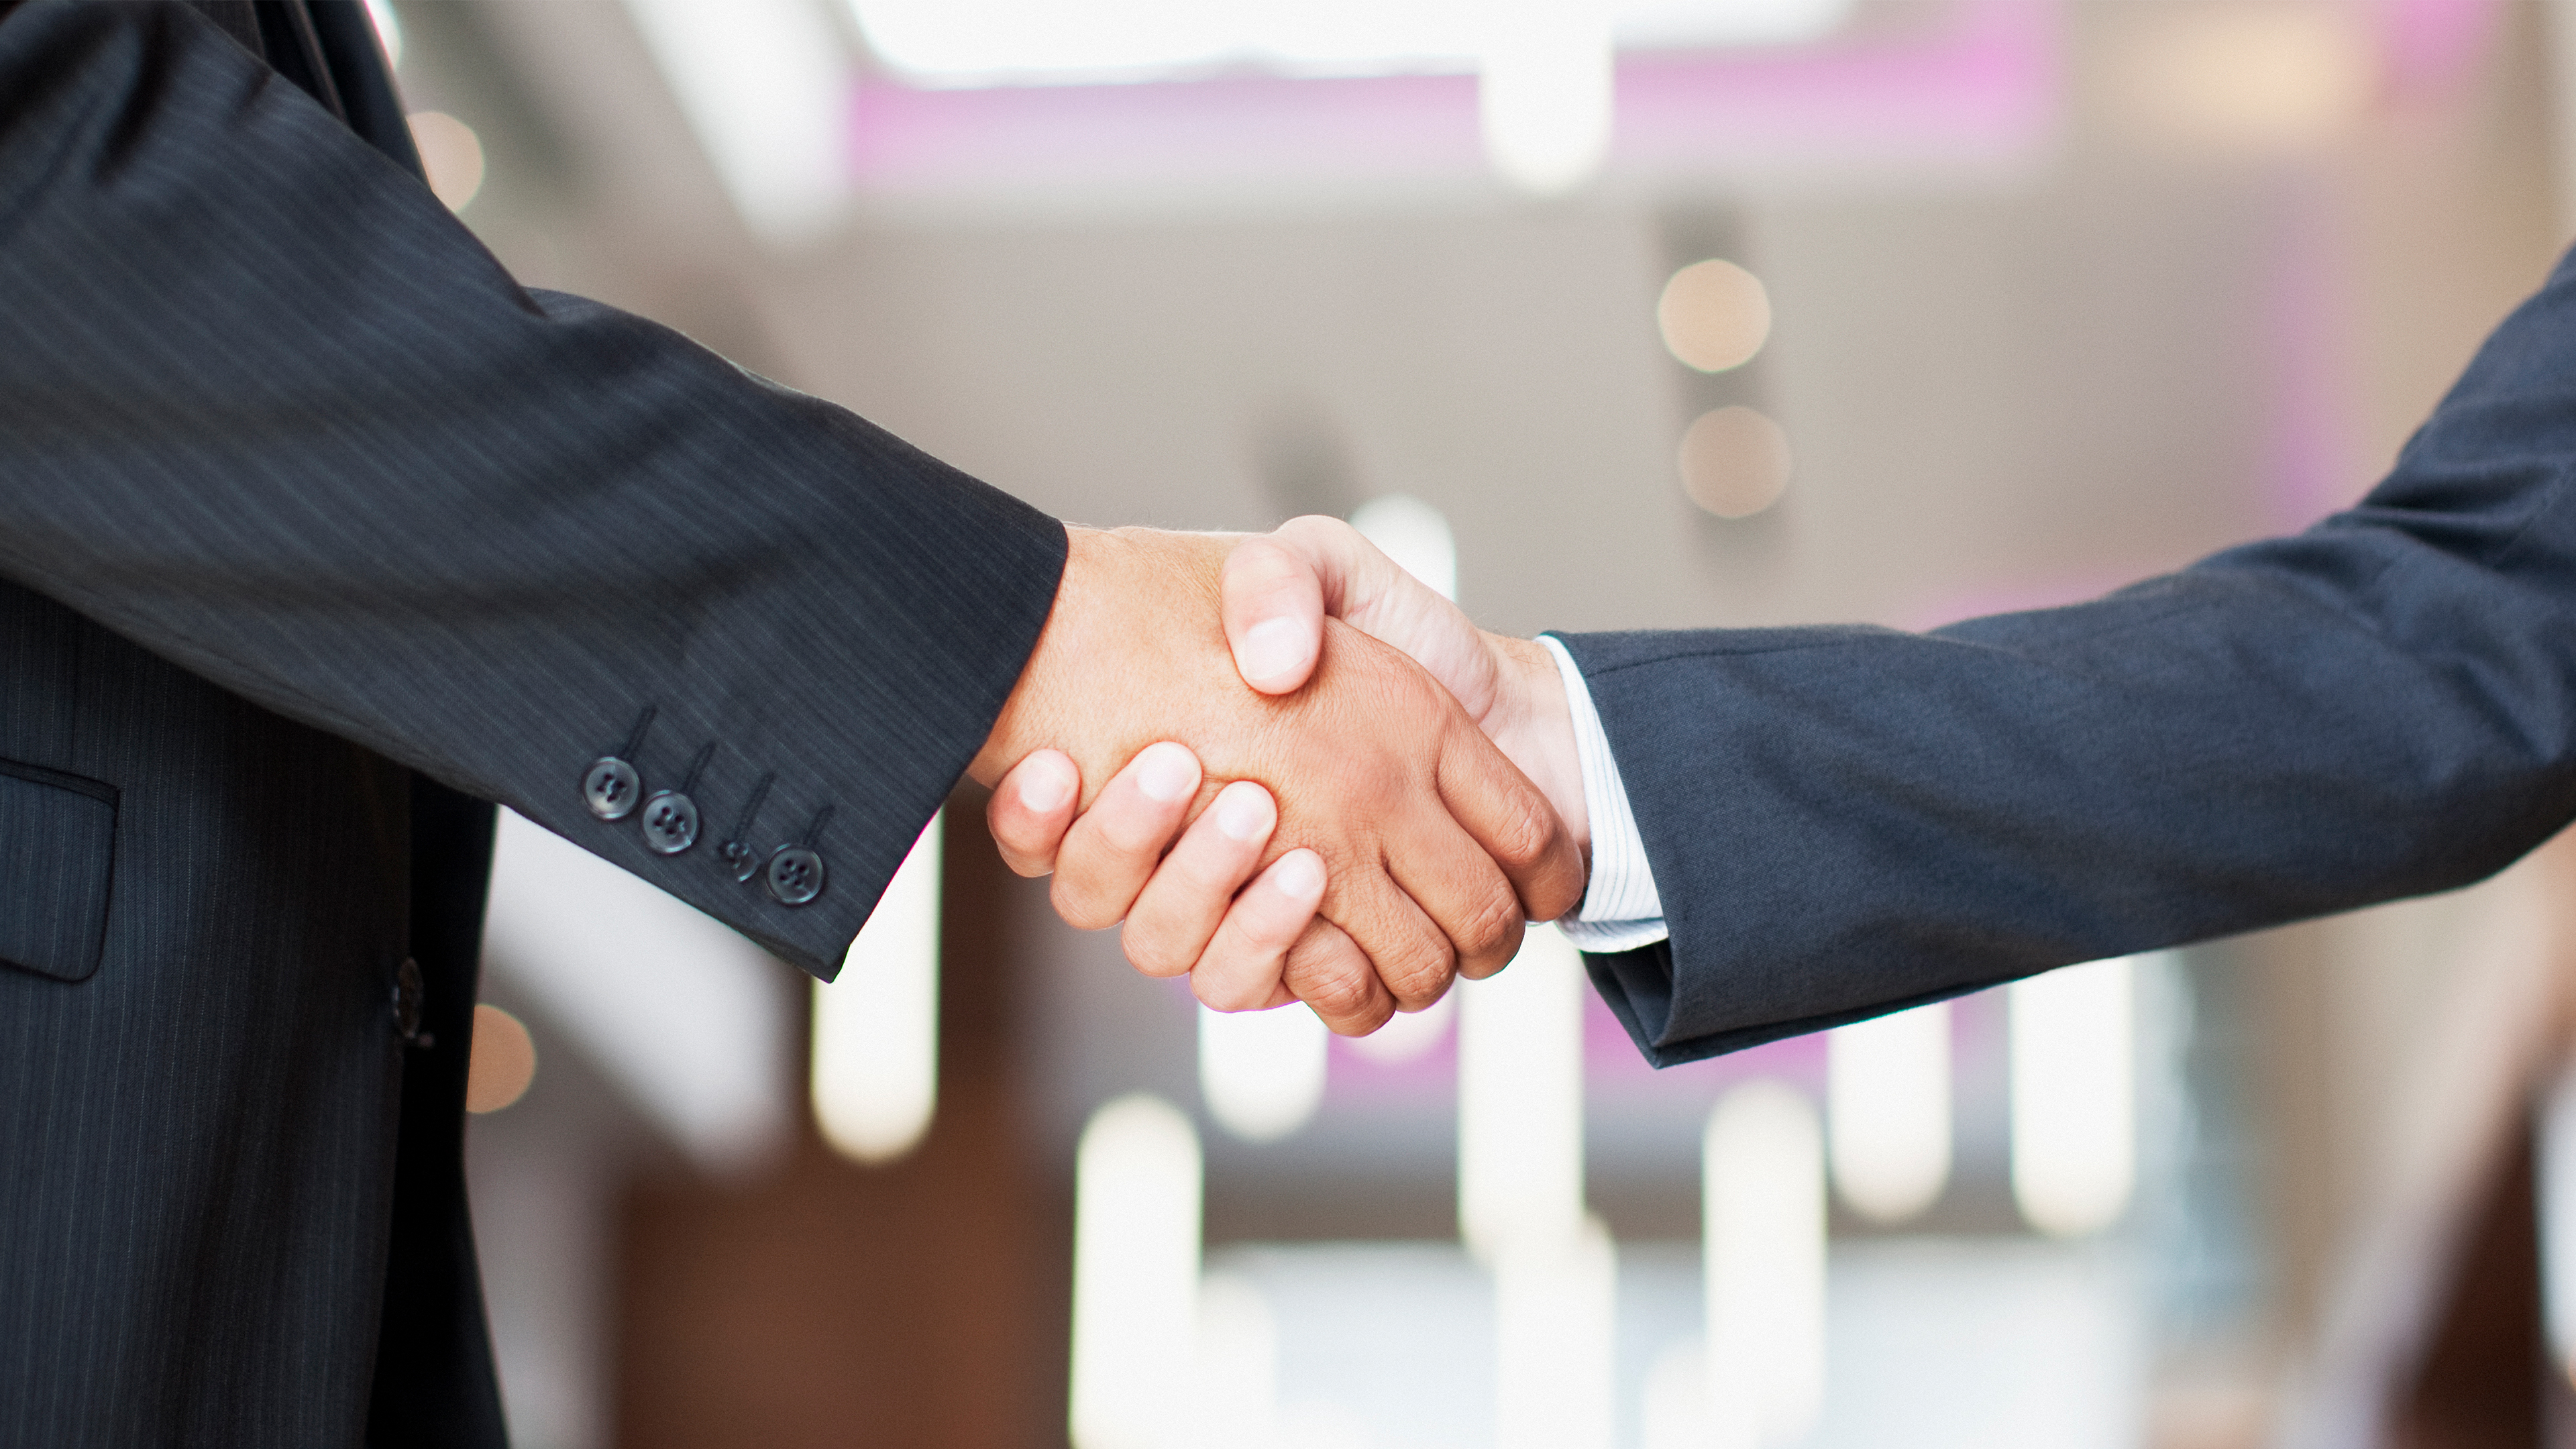 Four Keys to Successful Client/Vendor Relationships